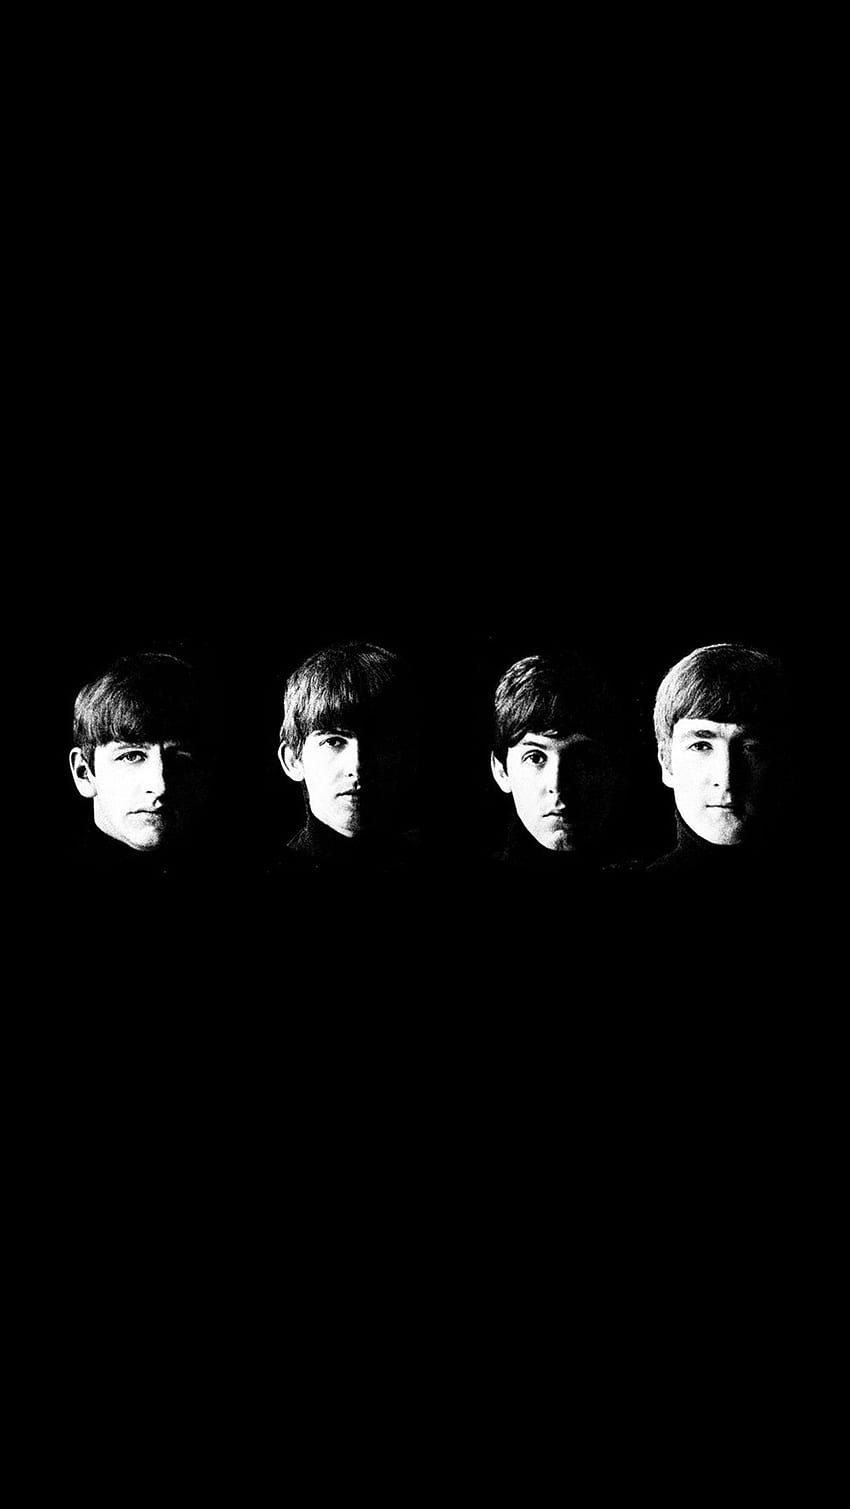 Benjamim Silva on KNOWING ME KNOWING YOU, JUST KNOW YOUR CRAFT. Beatles , The beatles, Beatles poster, John Lennon iPhone HD phone wallpaper